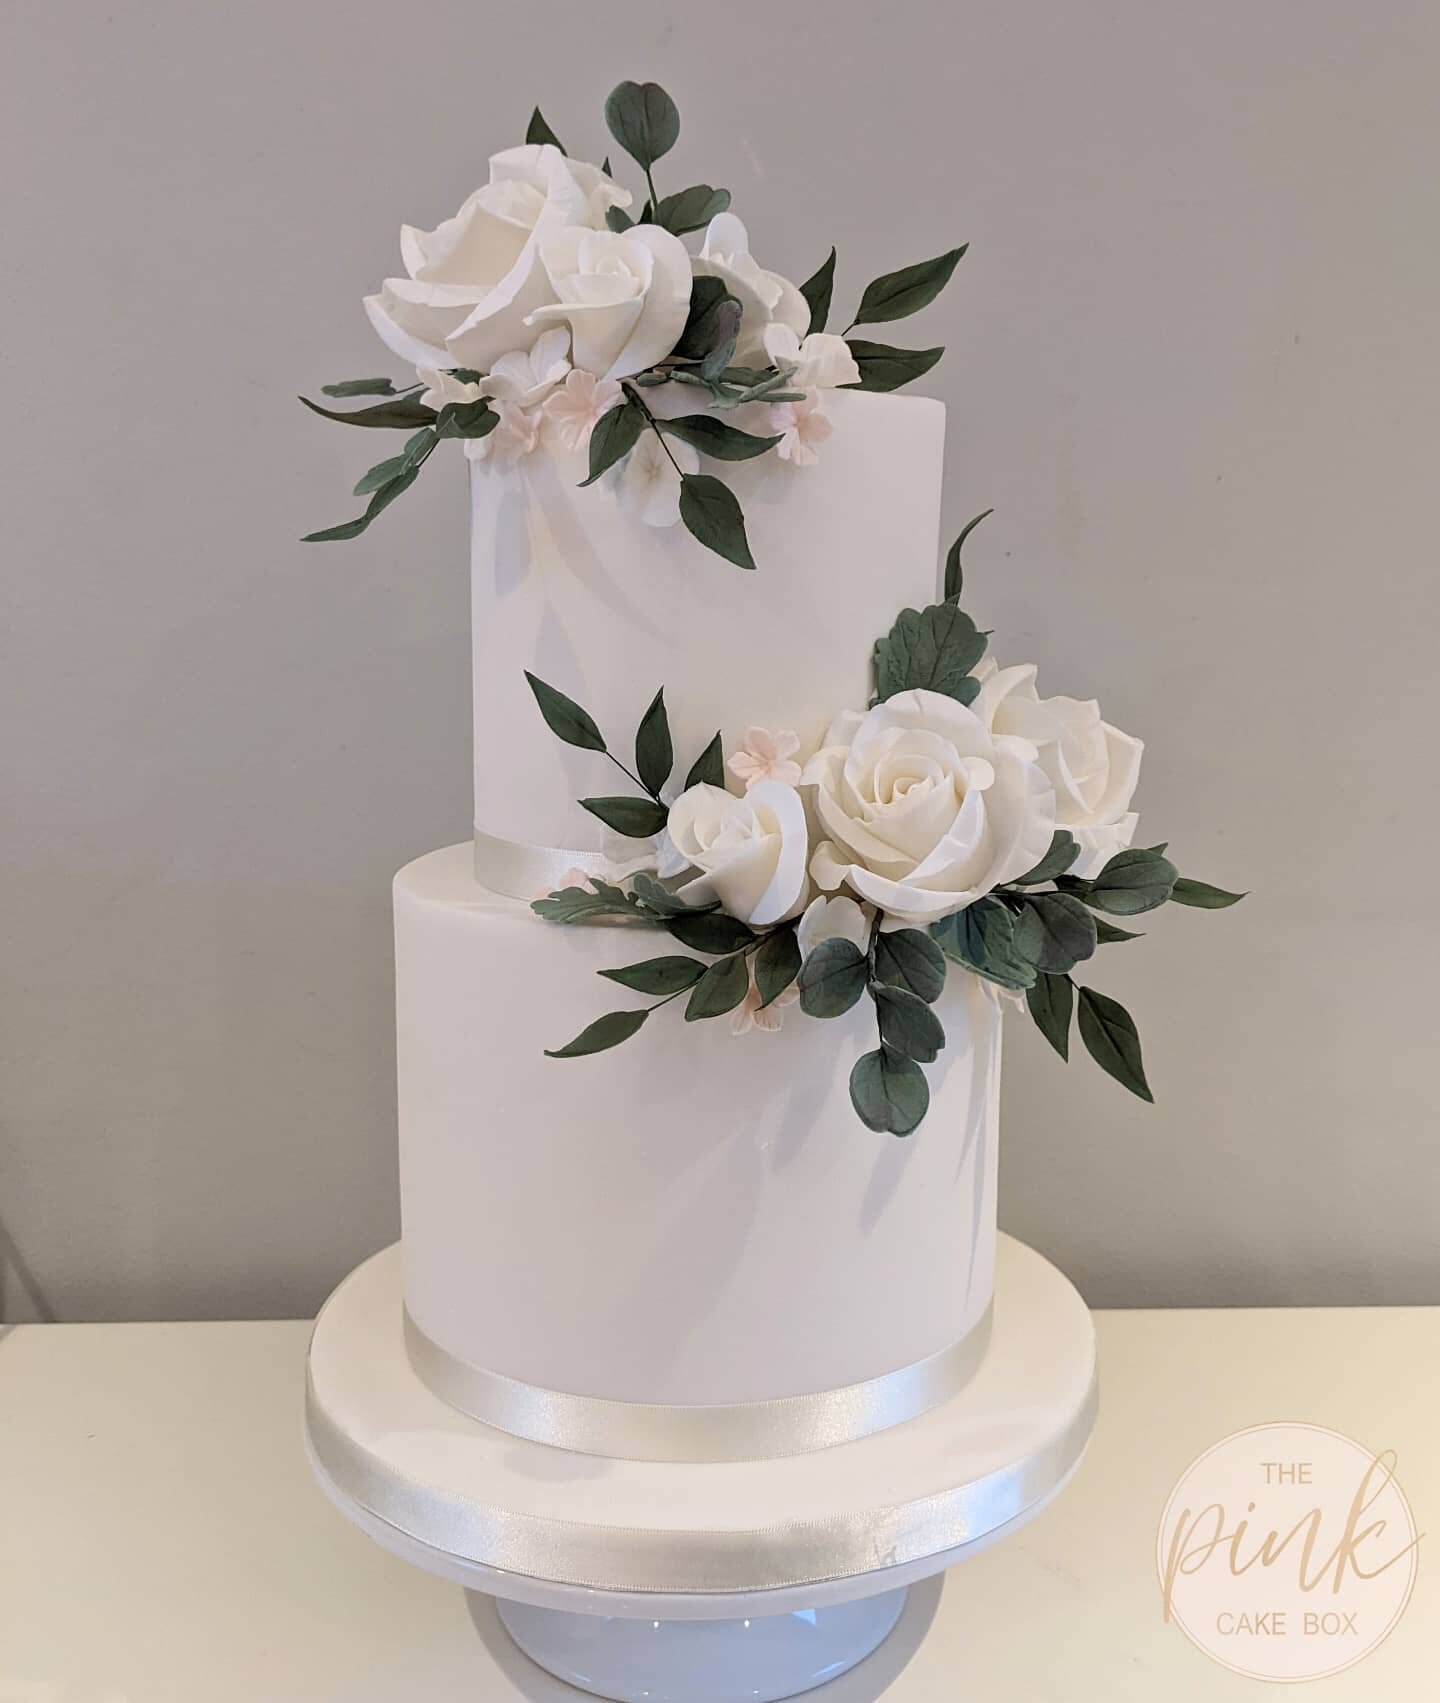 A lovely 2 tier wedding cake for Lucy and Neil with beautiful soft sugar flowers and foliages 😍
Set up at the beautiful @thewhitehartmoorwoodmoor in their Wingfield Lounge ❤️
Tiers of Zesty Lemon &amp; Lime and Very Berry. Hope you both had a specia